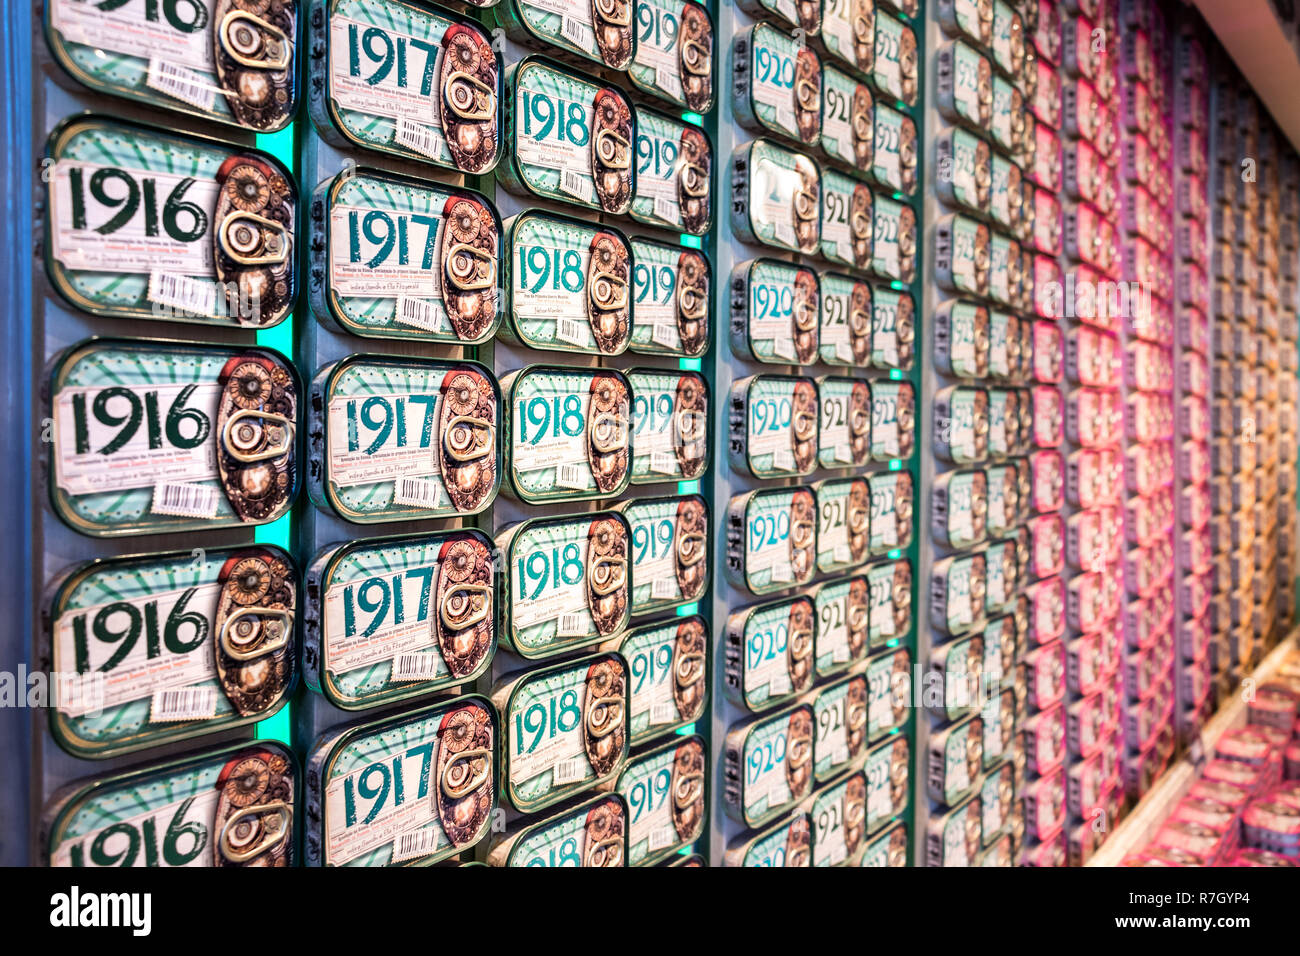 Lisbon, Portugal - July 9th, 2018: Perspective view of Fish Cans For Sale at a polular Sardines Store in Lisbon, Portugal. Stock Photo